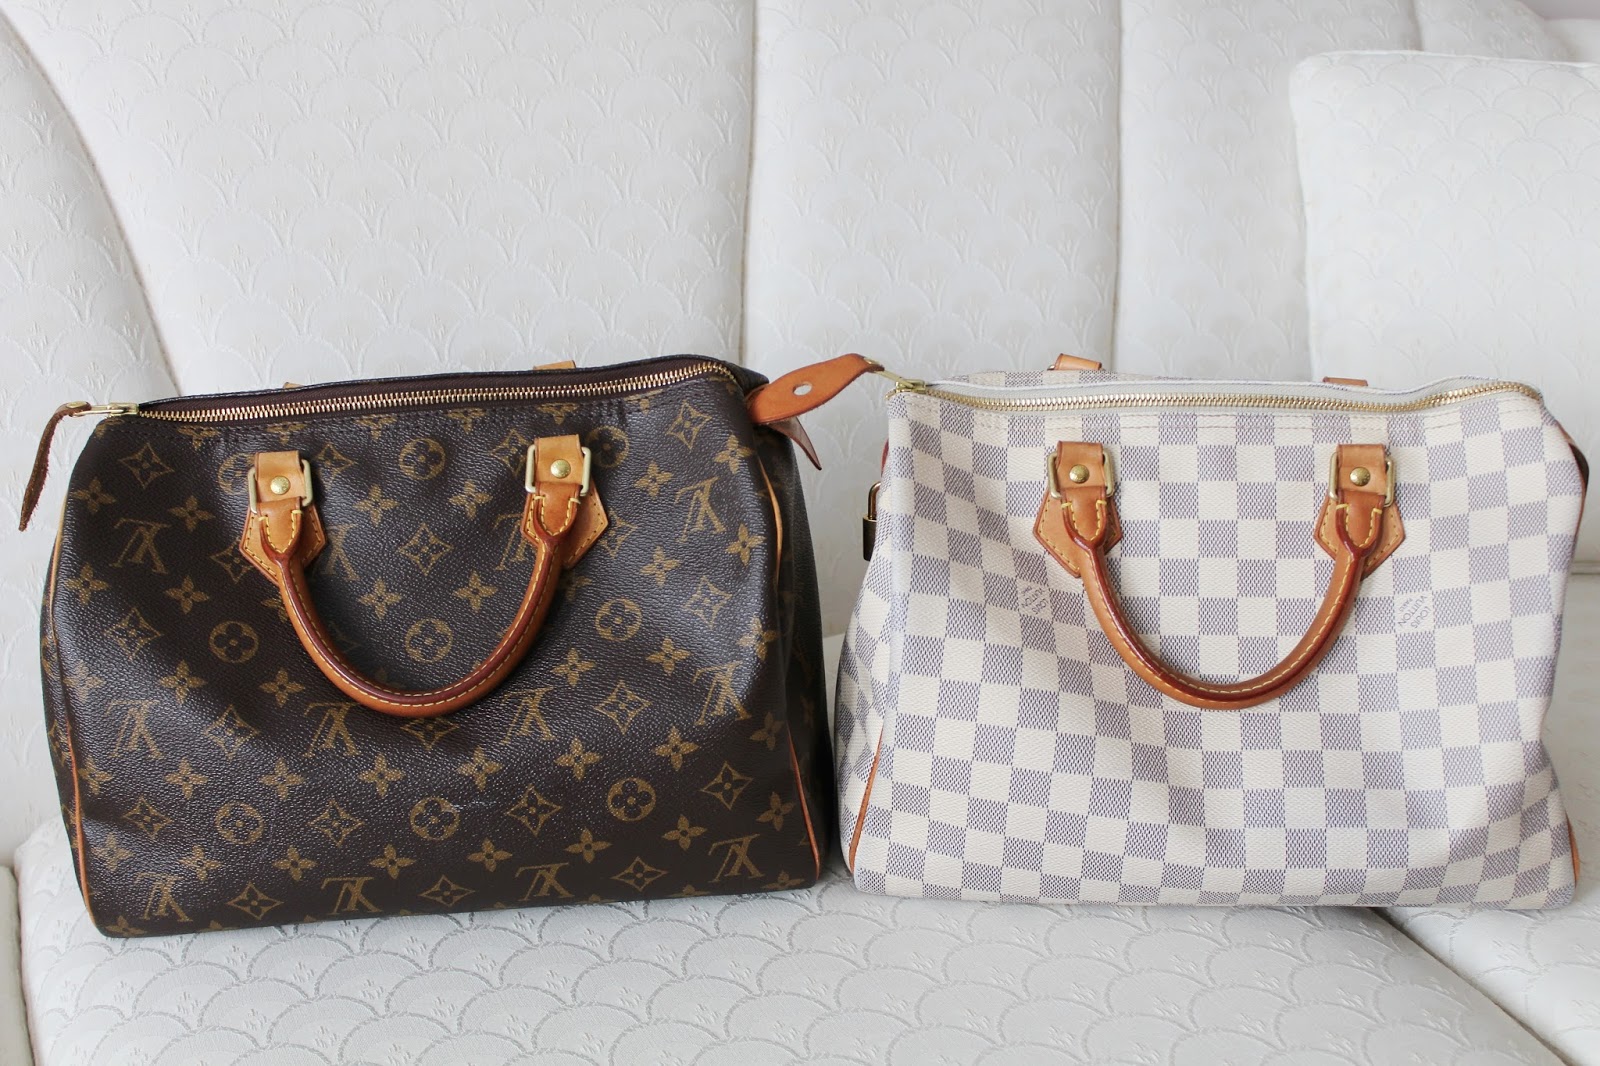 Review: Louis Vuitton Speedy 30 - late night minutes